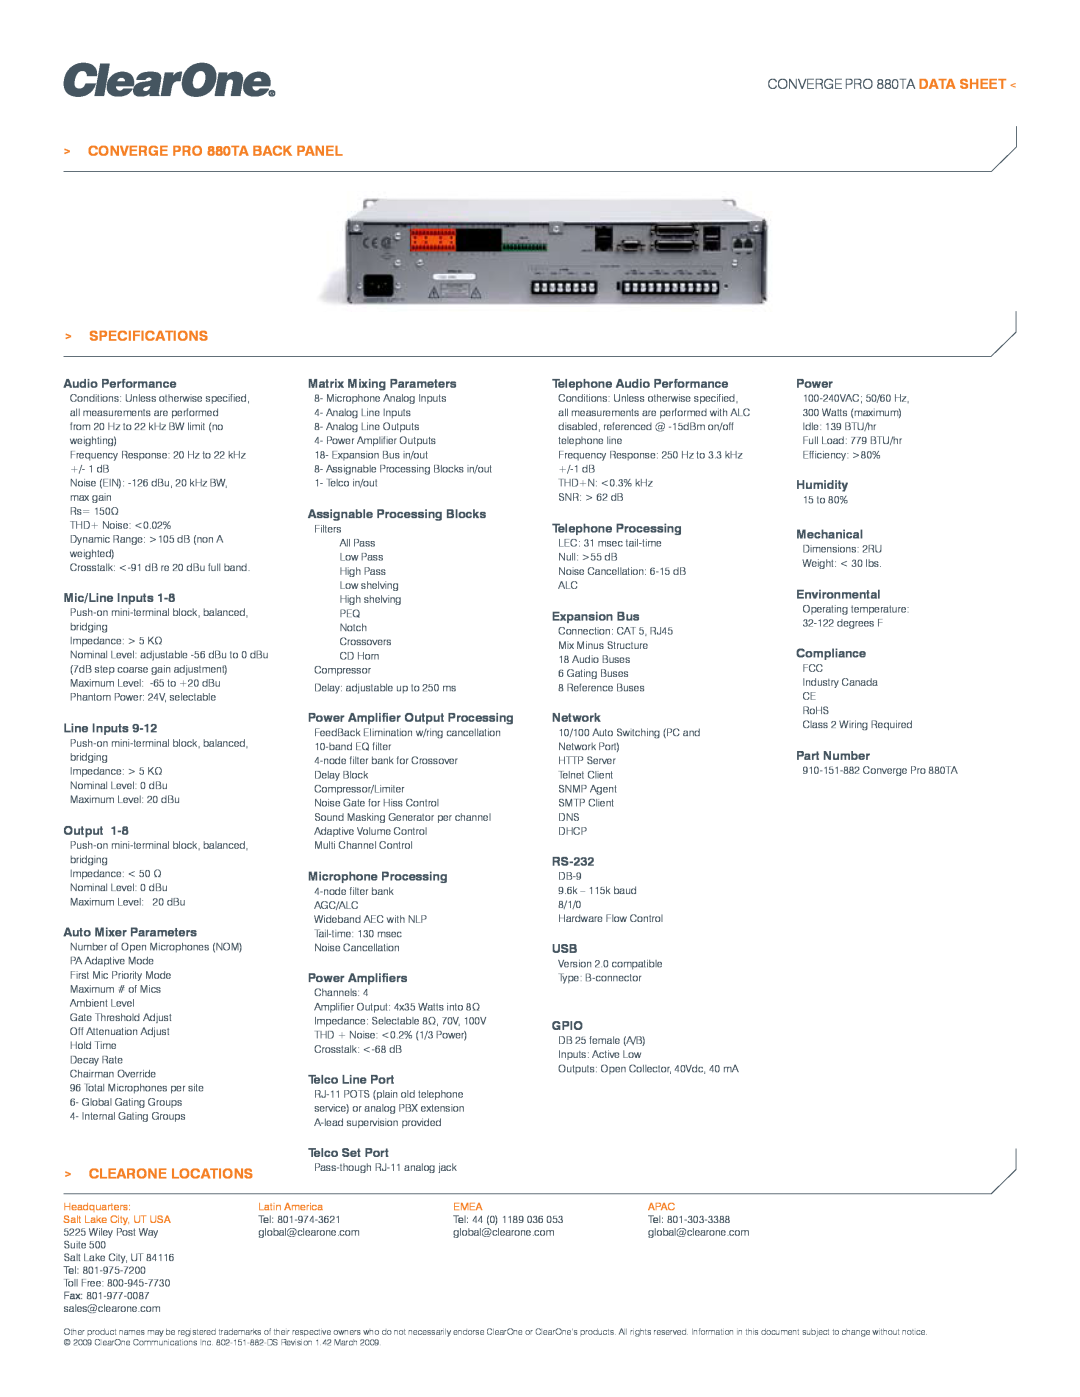 ClearOne comm manual CONVERGE PRO 880TA BACK PANEL, CONVERGE PRO 880TA DATA SHEET, Specifications, Clearone Locations 